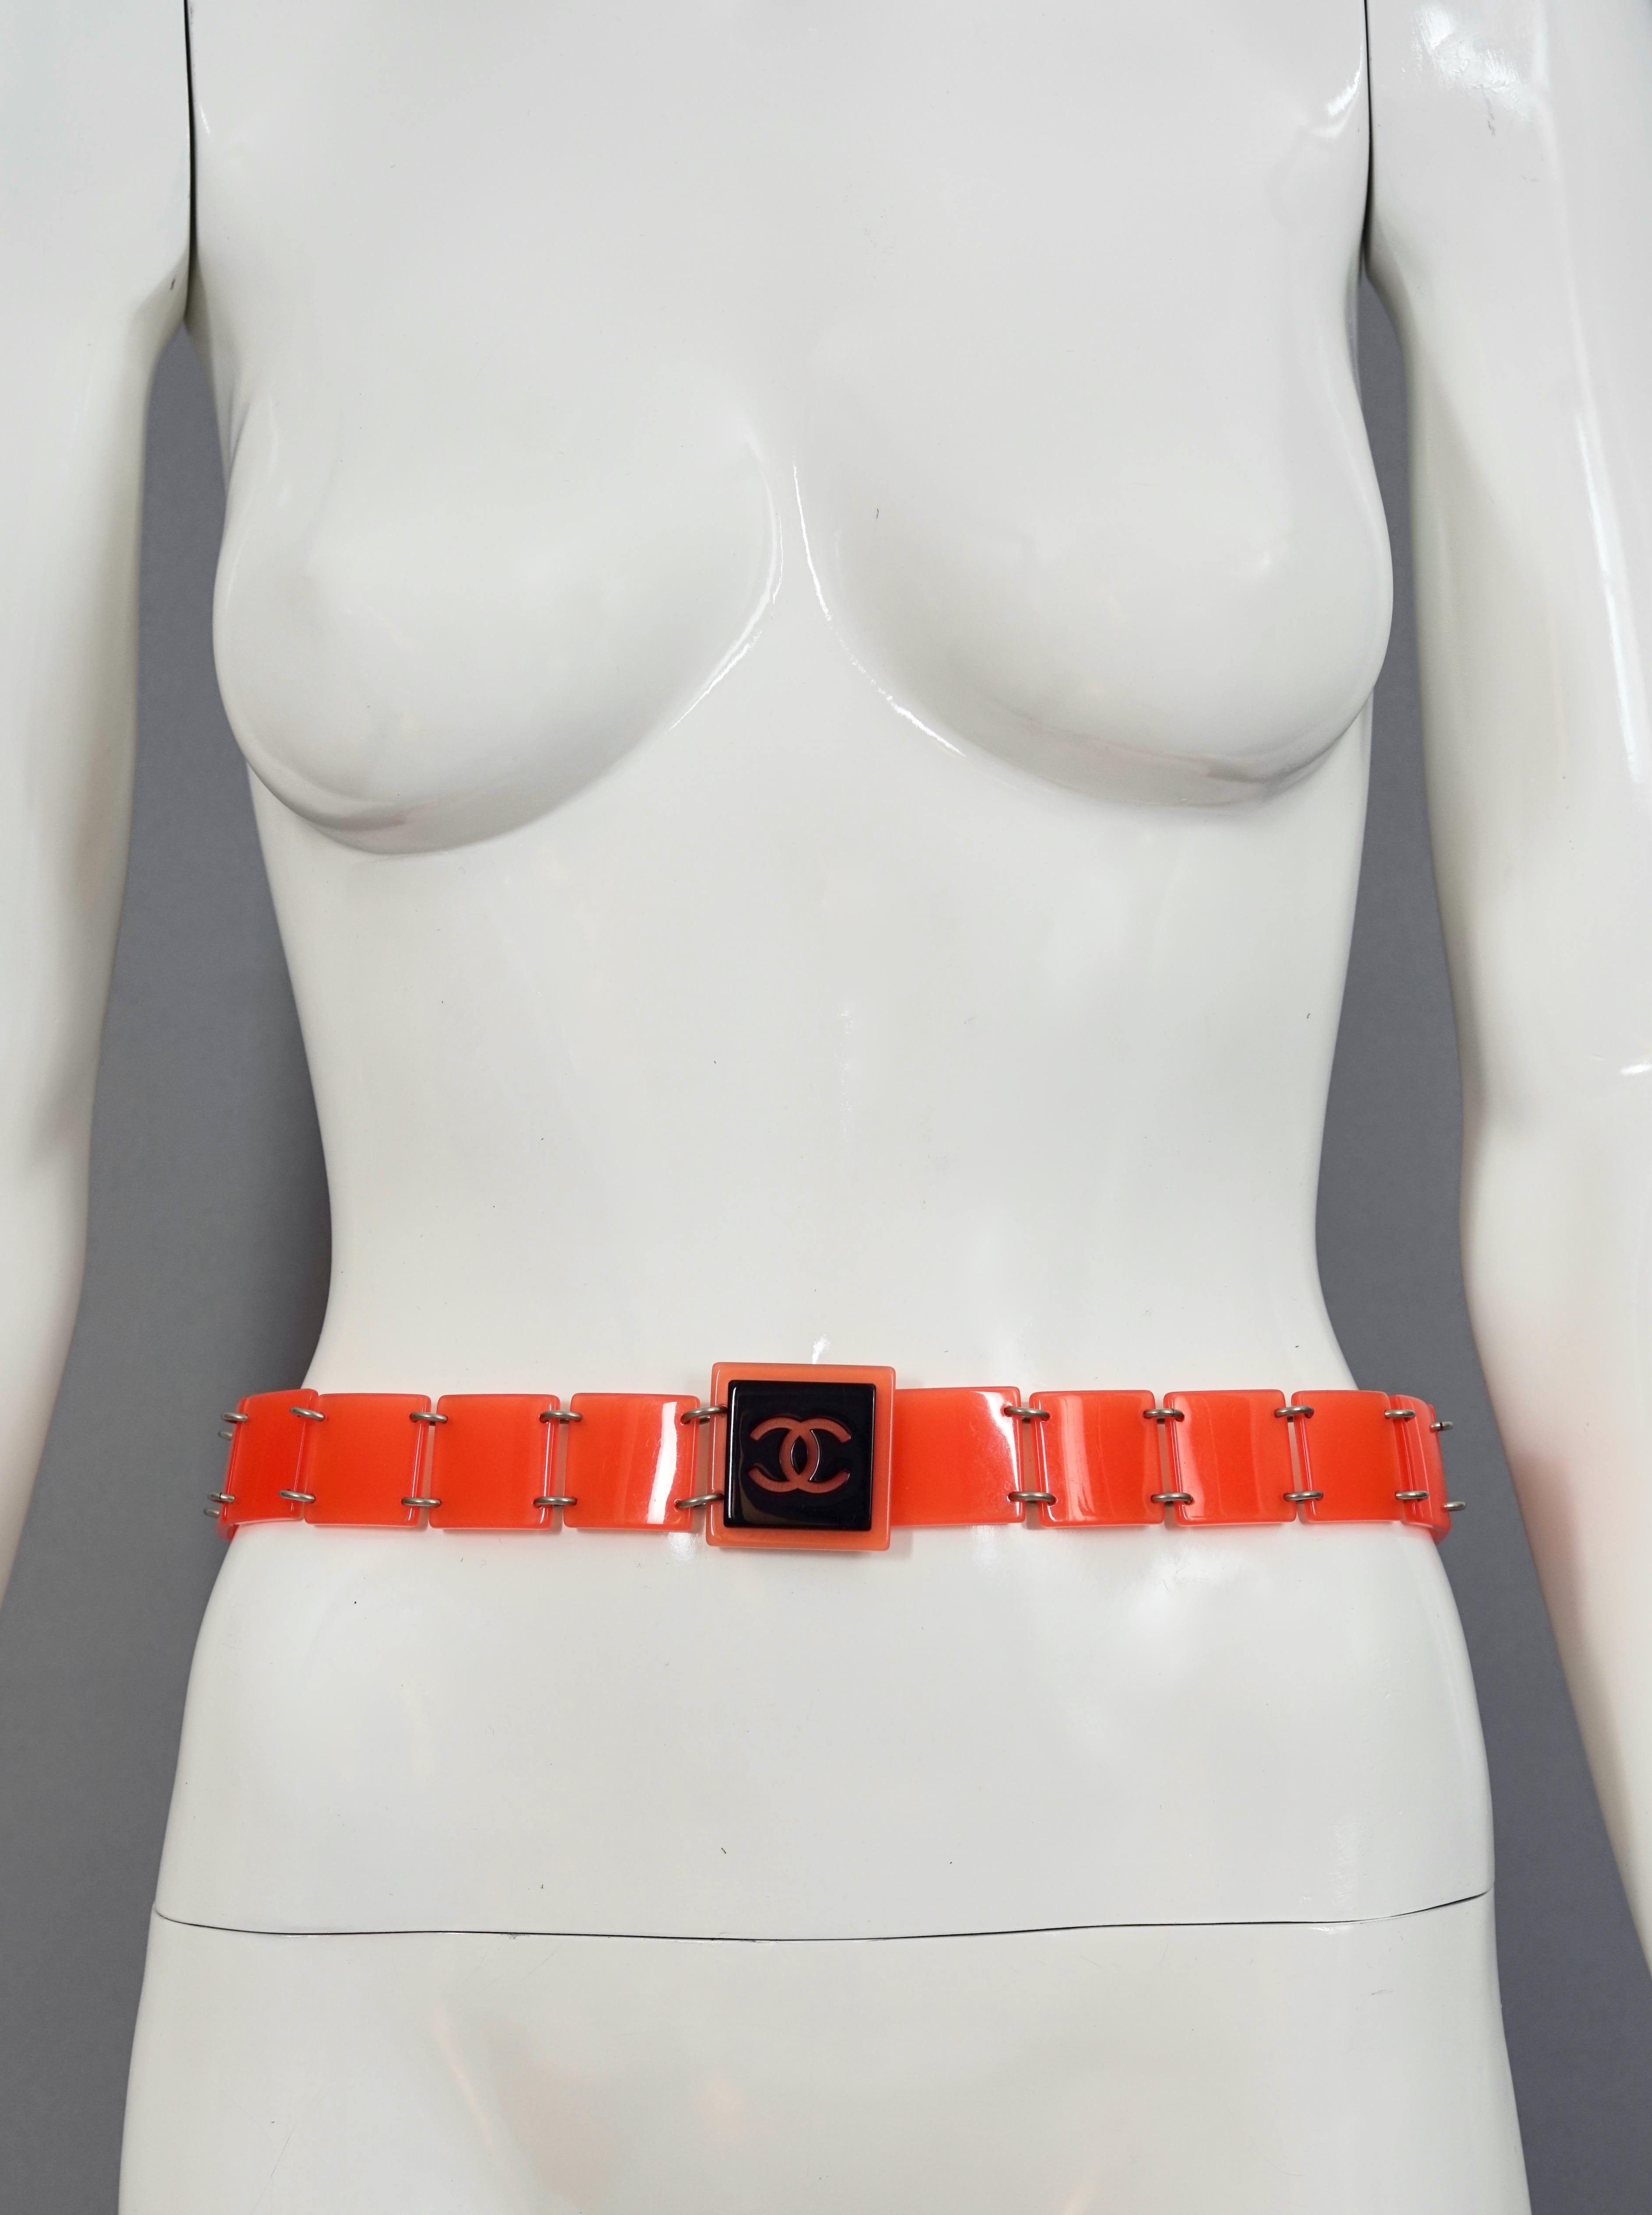 Vintage CHANEL Logo Neon Orange Modular Block Link Belt

Measurements:
Buckle Height: 1.57 inches (4 cm)
Strap Height: 1.18 inches (3 cm)
Wearable Length: 29.52 inches (75 cm)

Features:
- 100% Authentic CHANEL from the 2000 Transition Collection.
-